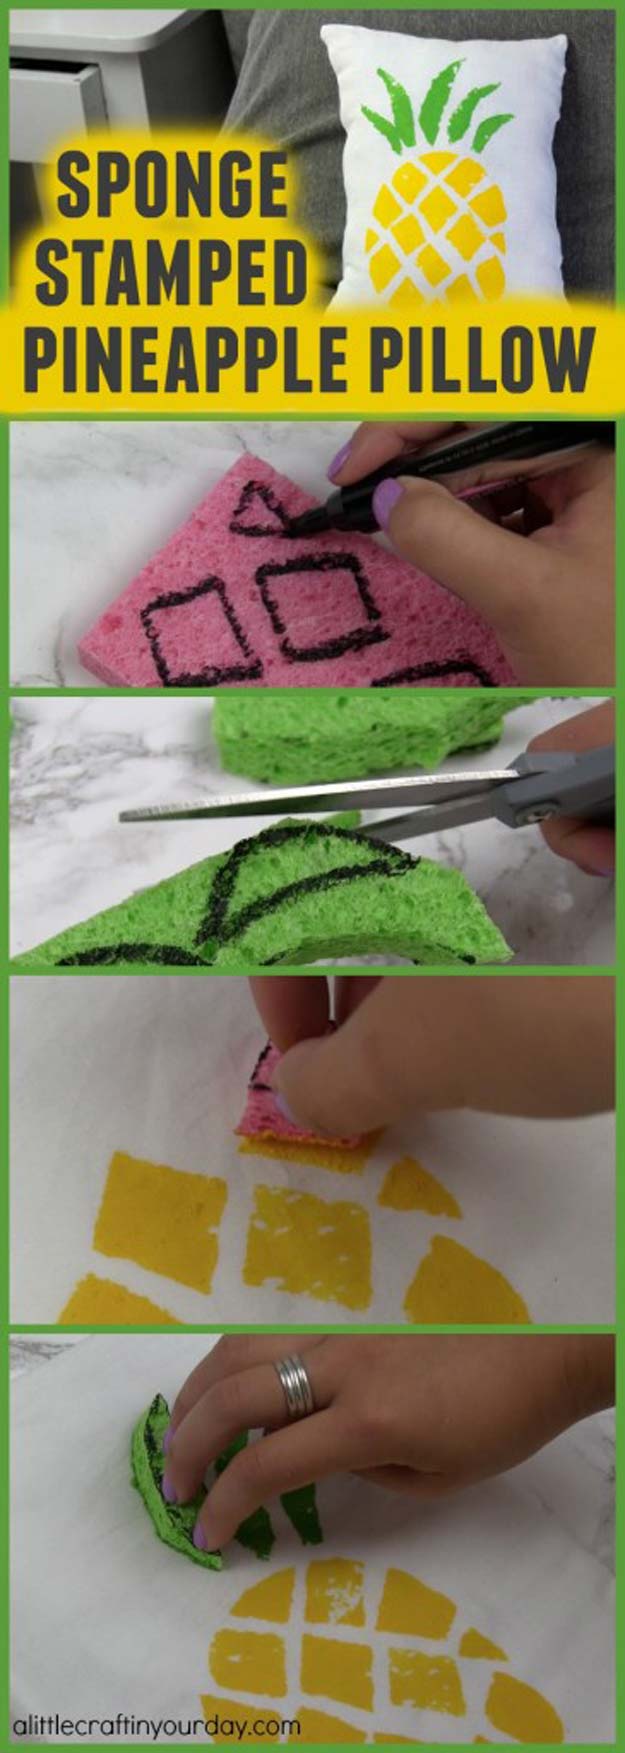 Best DIY Ideas from Tumblr - DIY Tumbr Inspired Pillows - Crafts and DIY Projects Inspired by Tumblr are Perfect Room Decor for Teens and Adults - Fun Crafts and Easy DIY Gifts, Clothes and Bedroom Project Tutorials for Teenagers and Tweens 